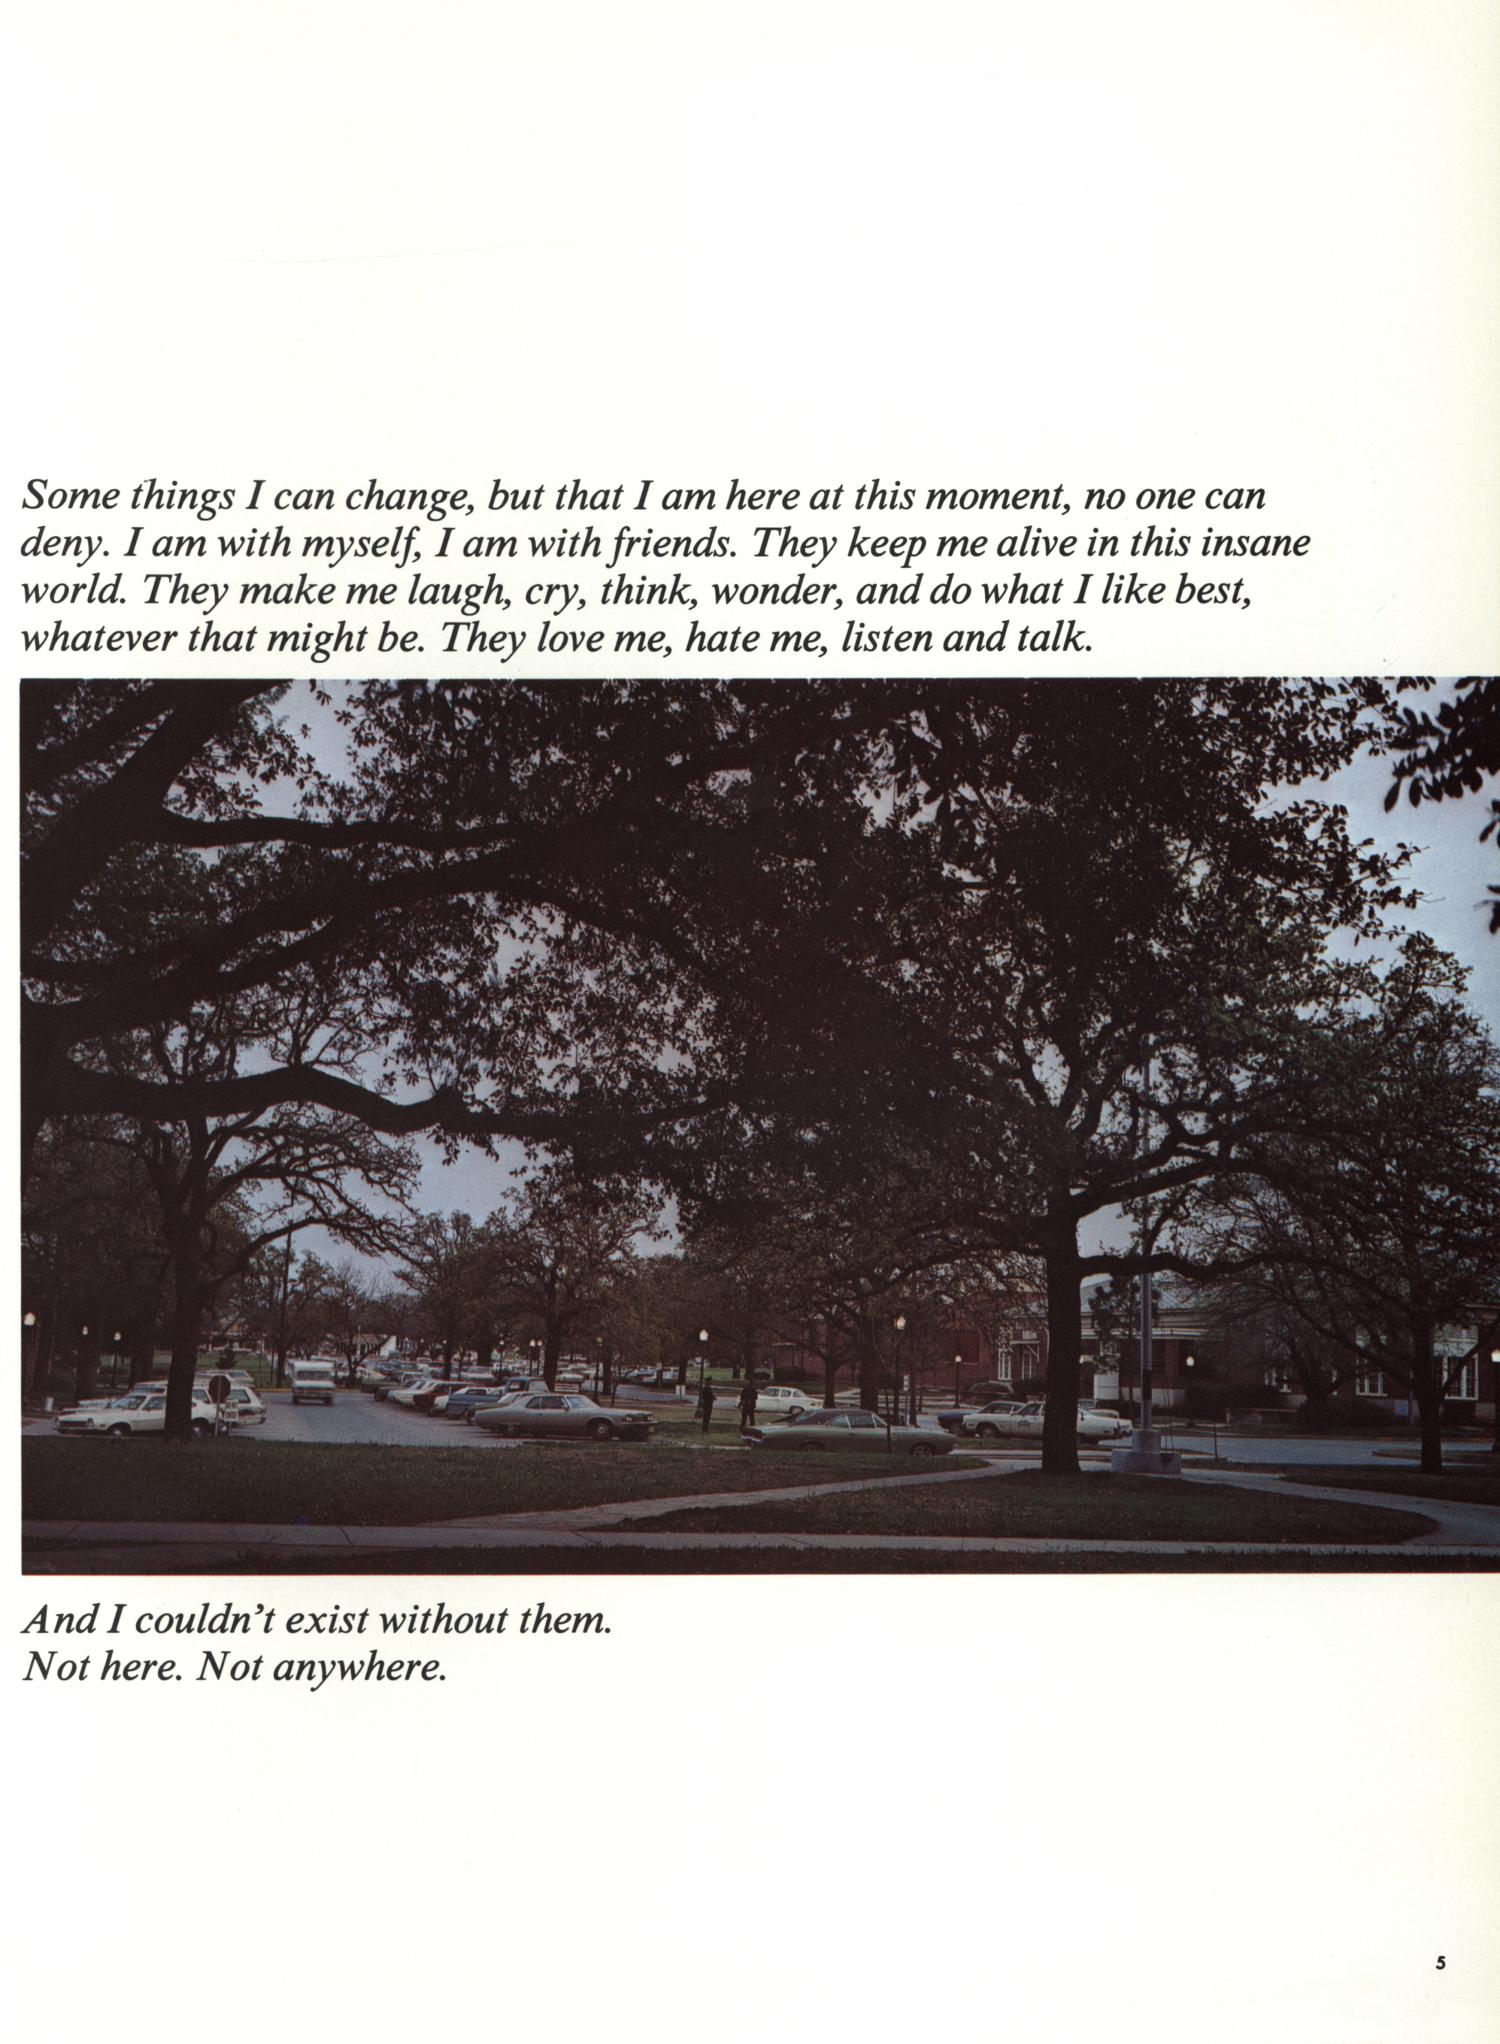 The Grassburr, Yearbook of Tarleton State College, 1973
                                                
                                                    5
                                                